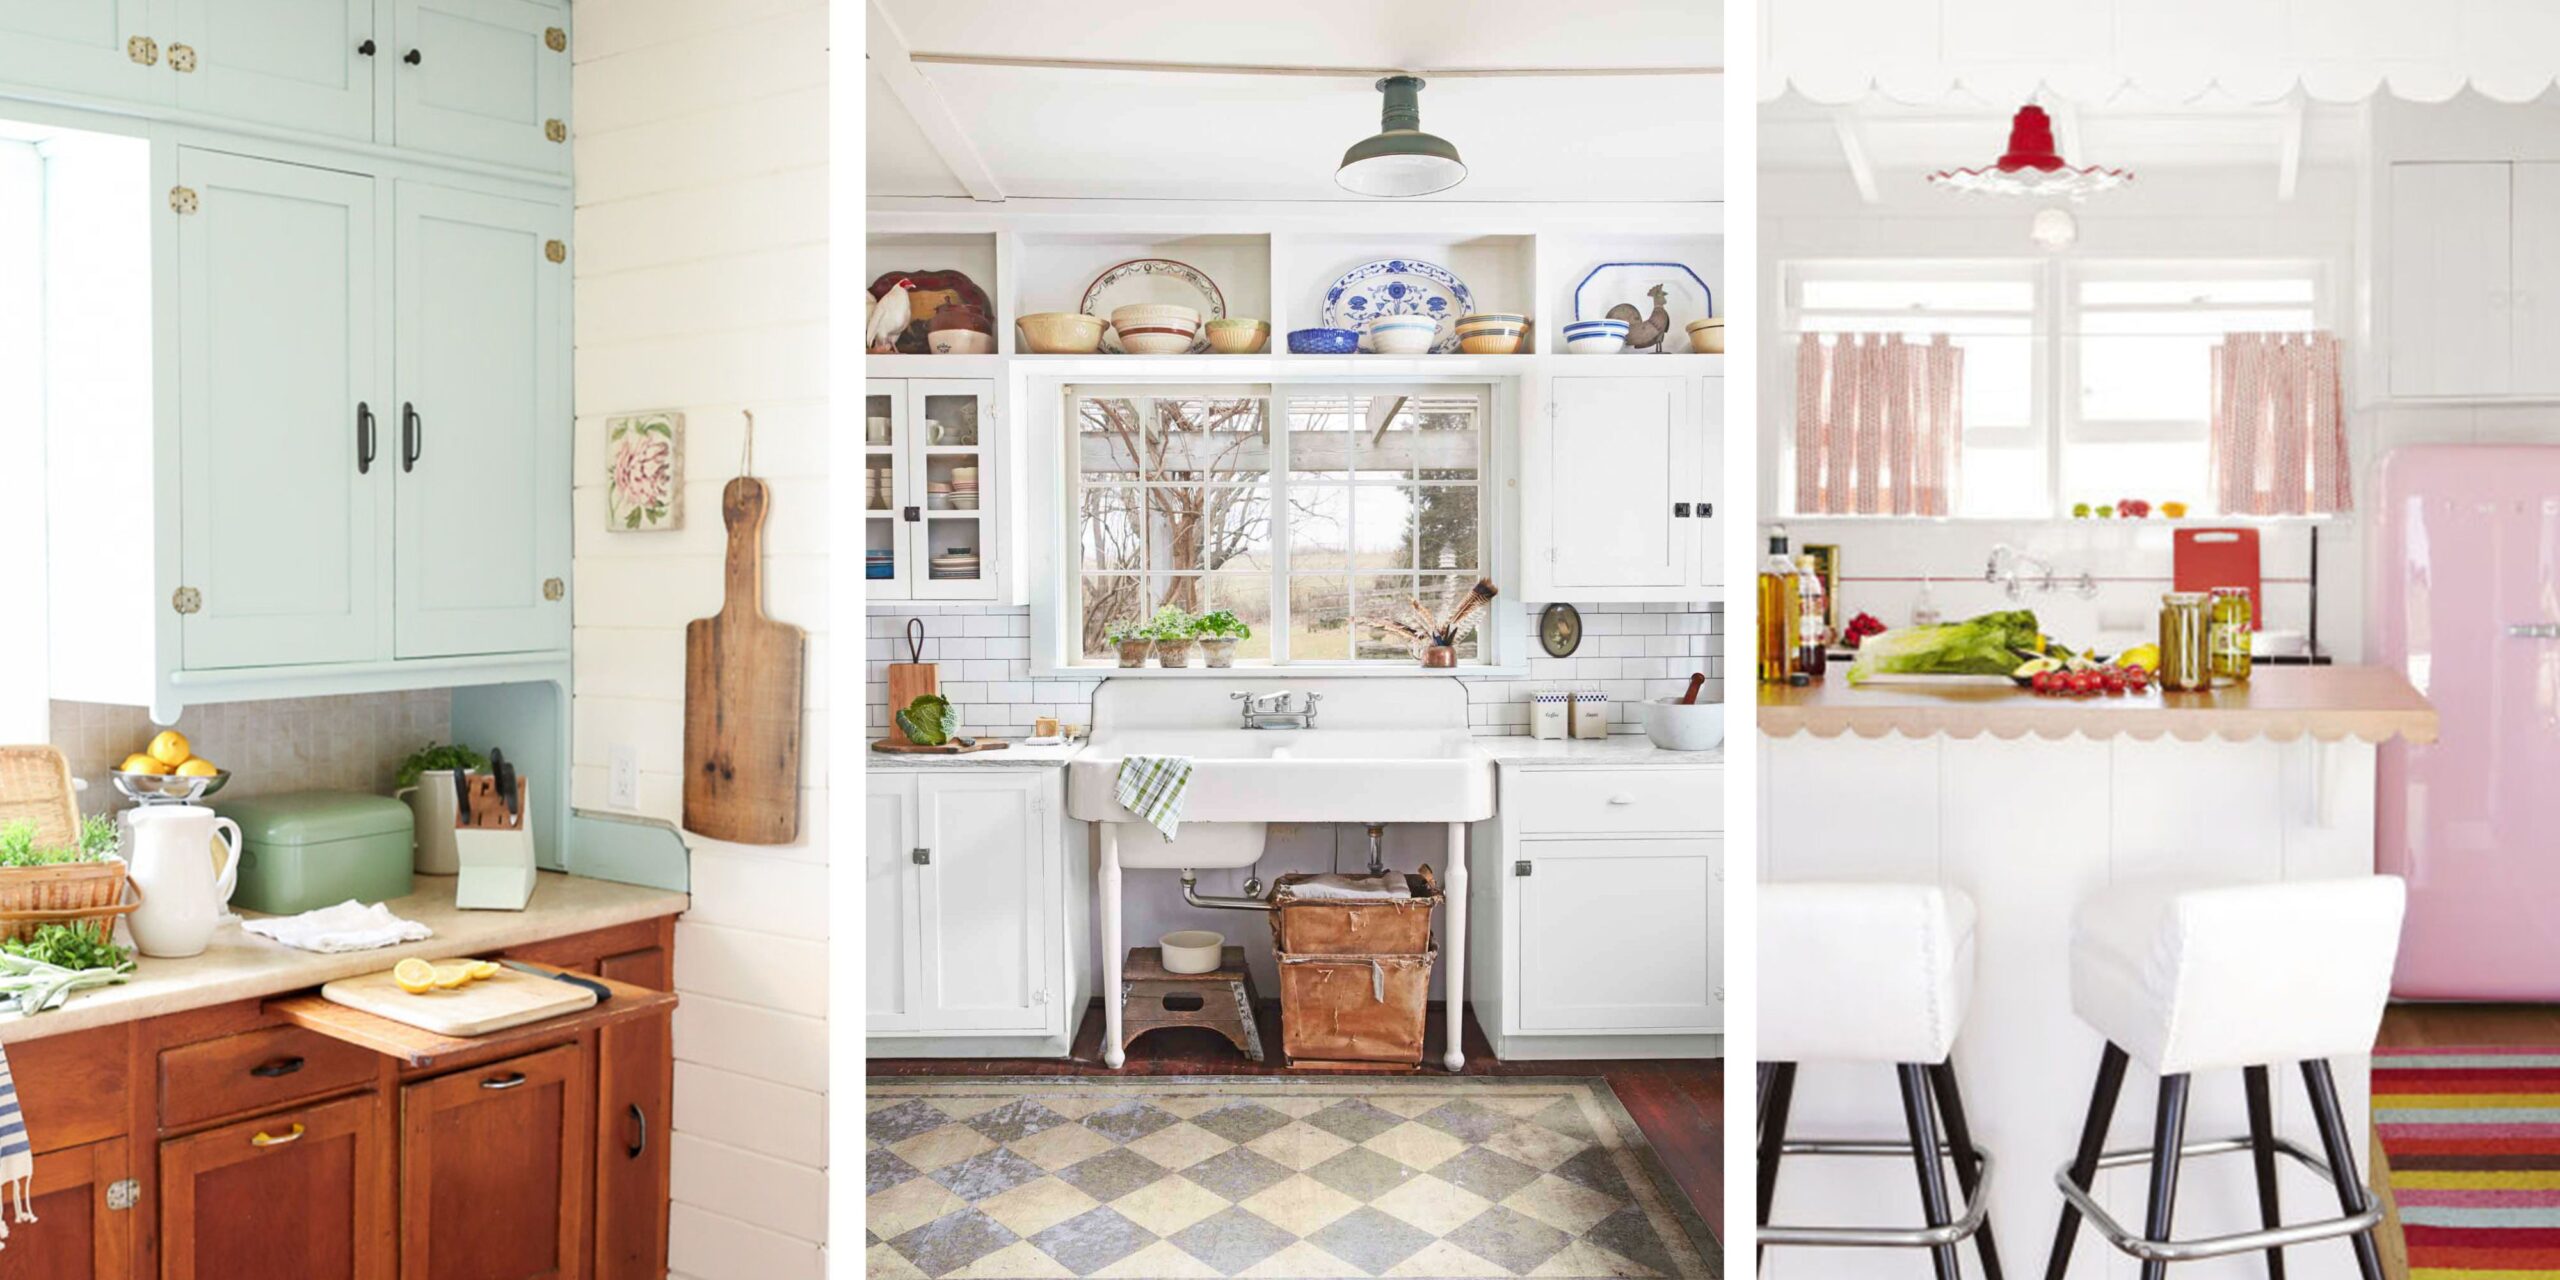 Vintage Kitchen: Artistic And Beautiful